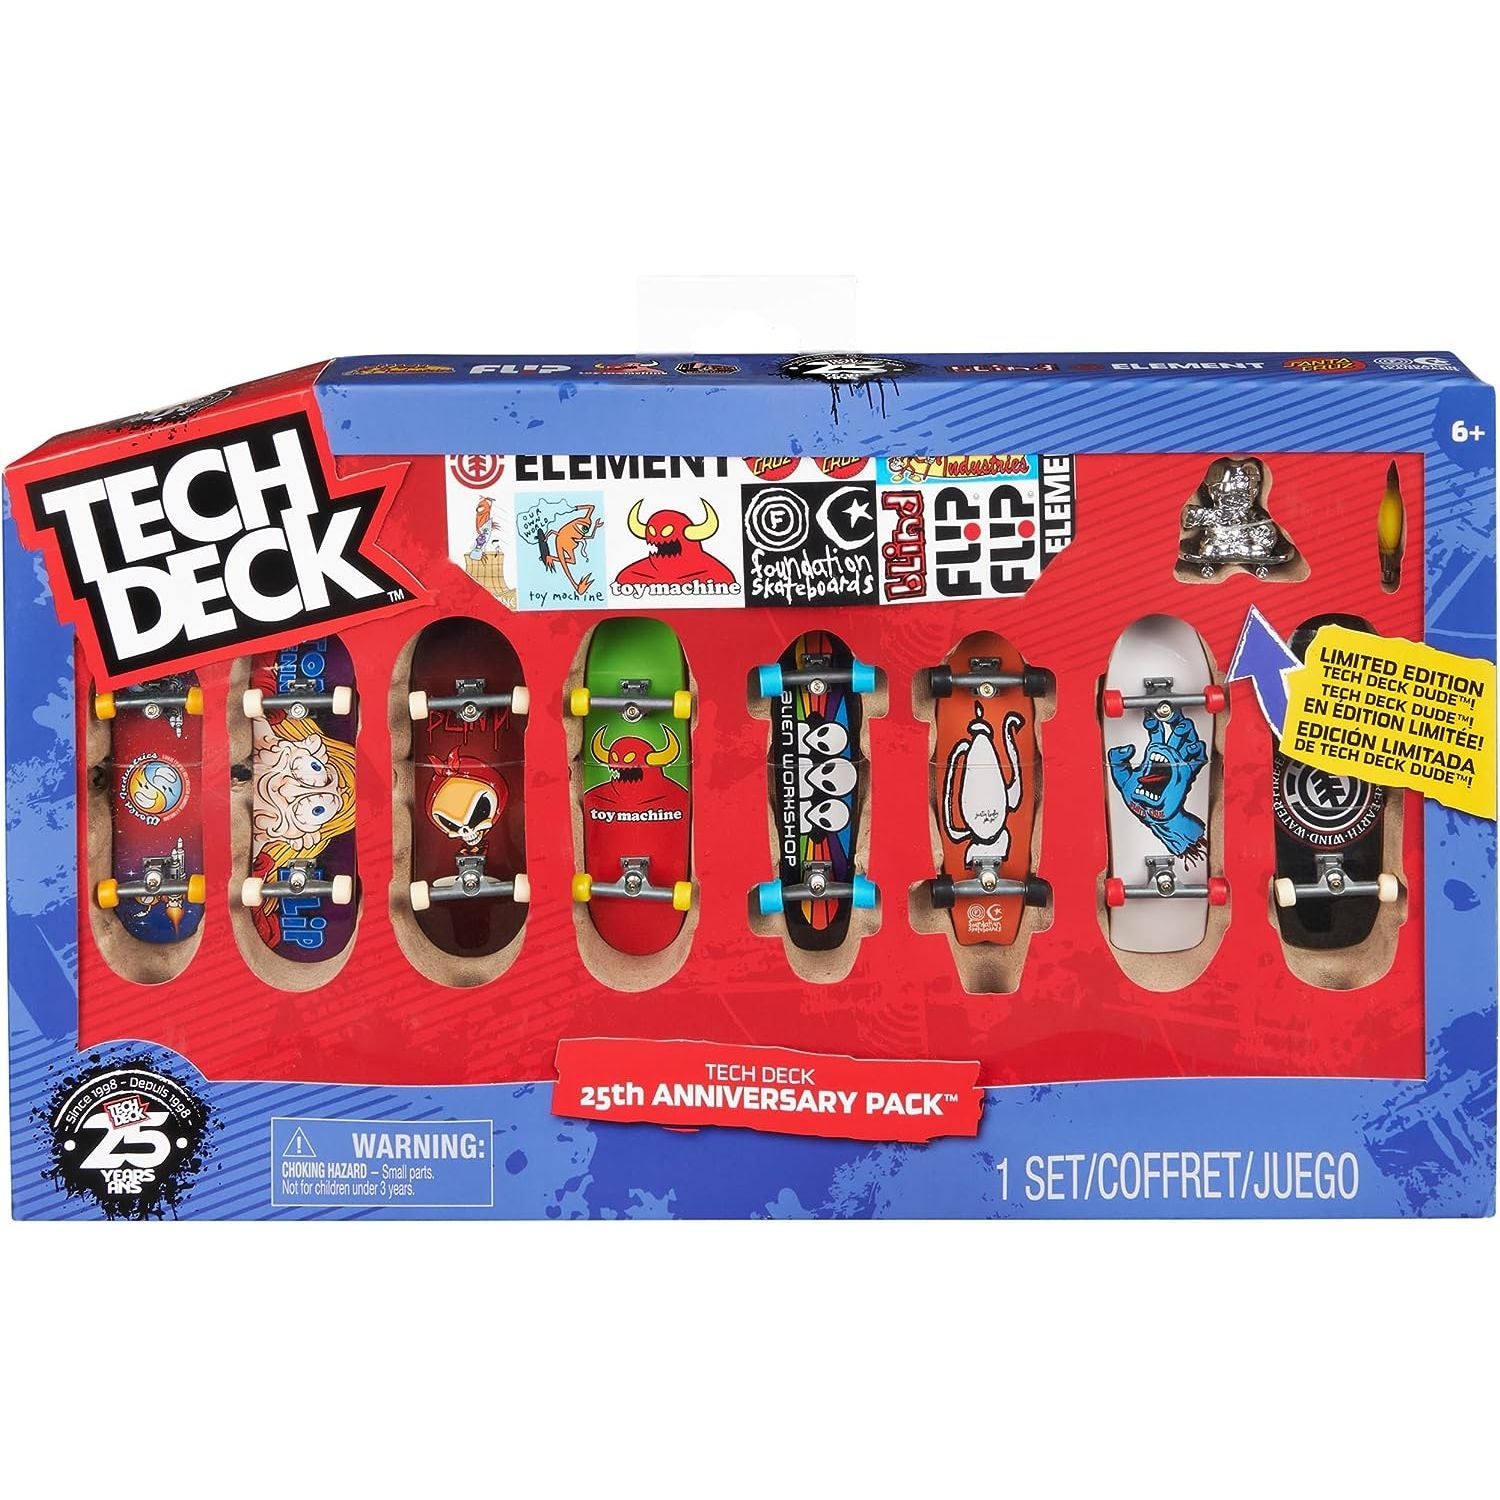 TECH DECK, 25th Anniversary 8-Pack Fingerboards with Exclusive Figure, Collectible and Customizable Mini Skateboards